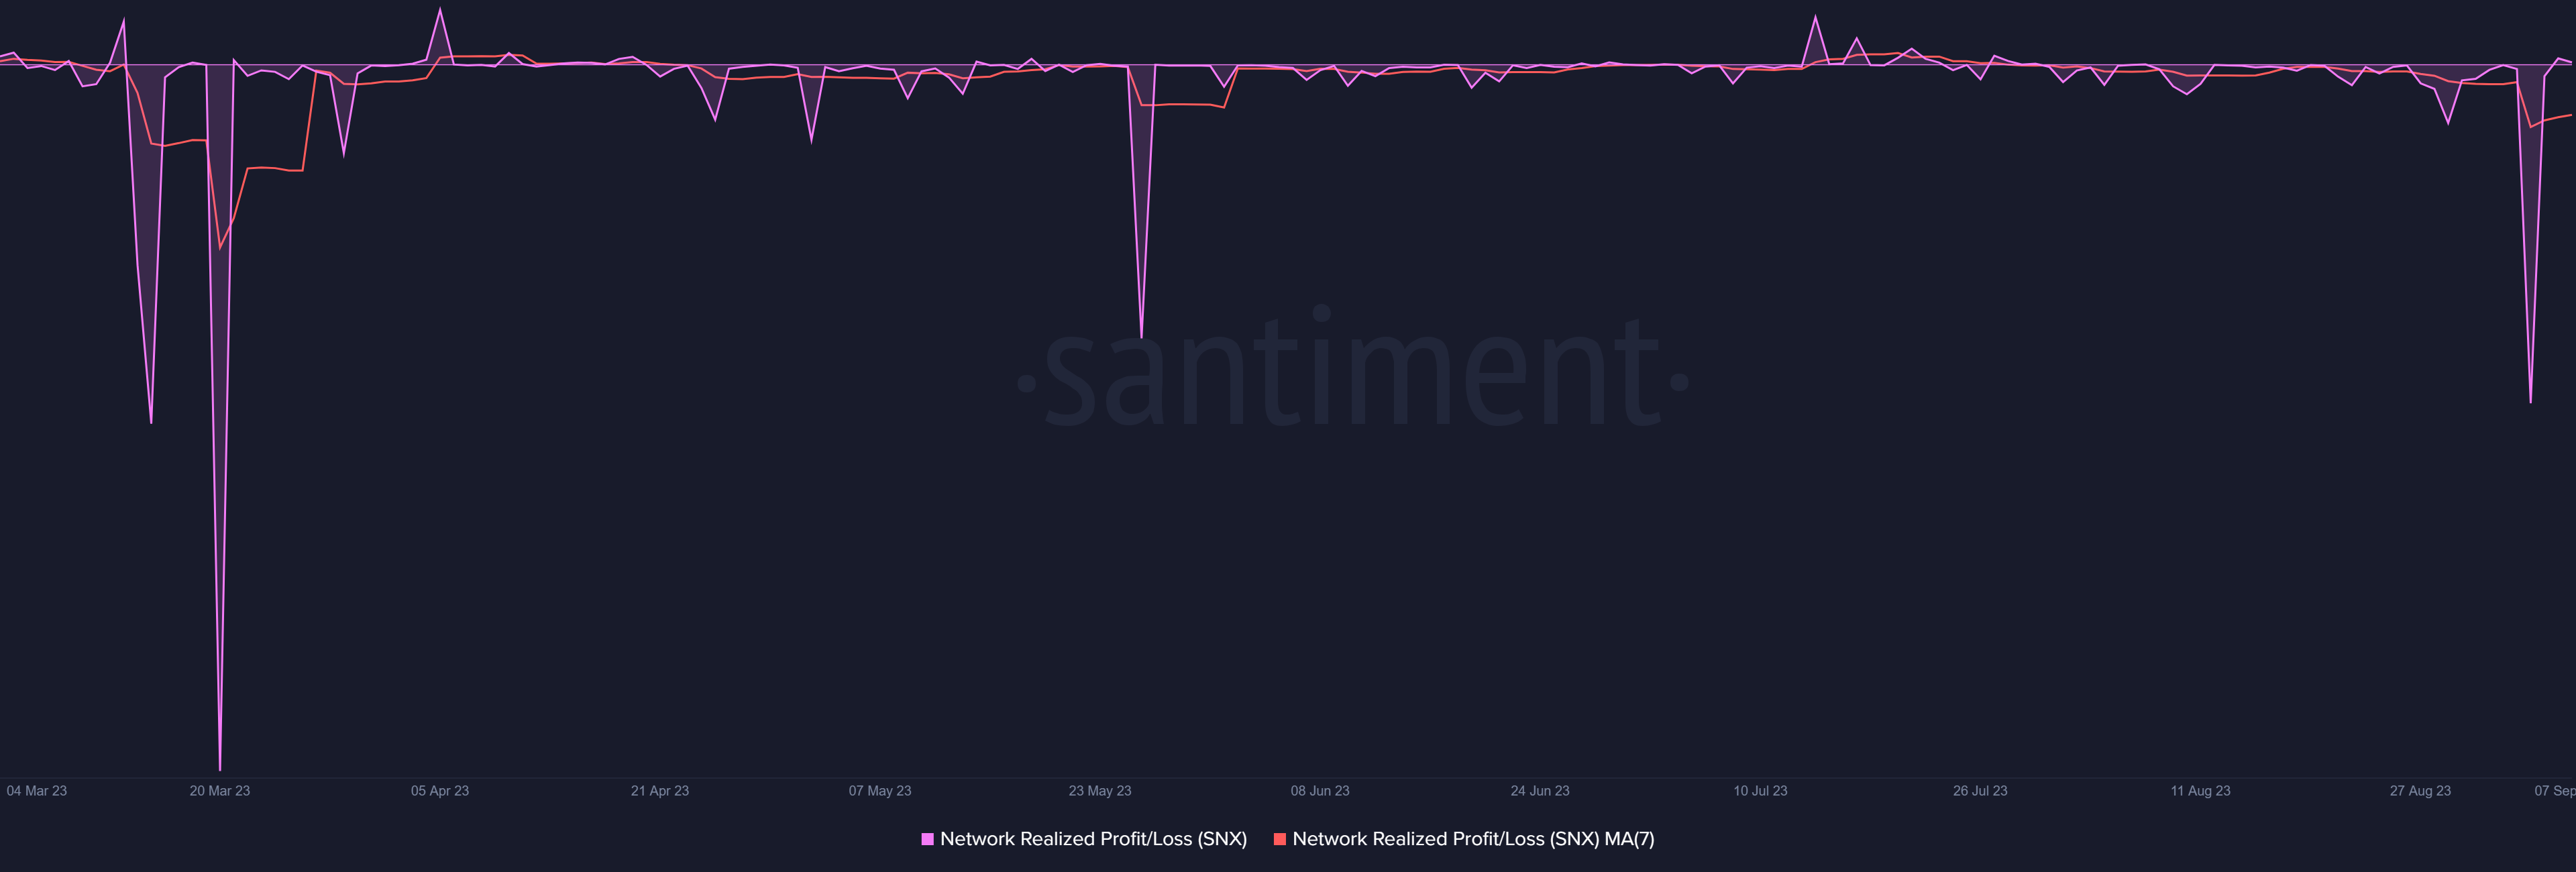 Synthetix network realized losses